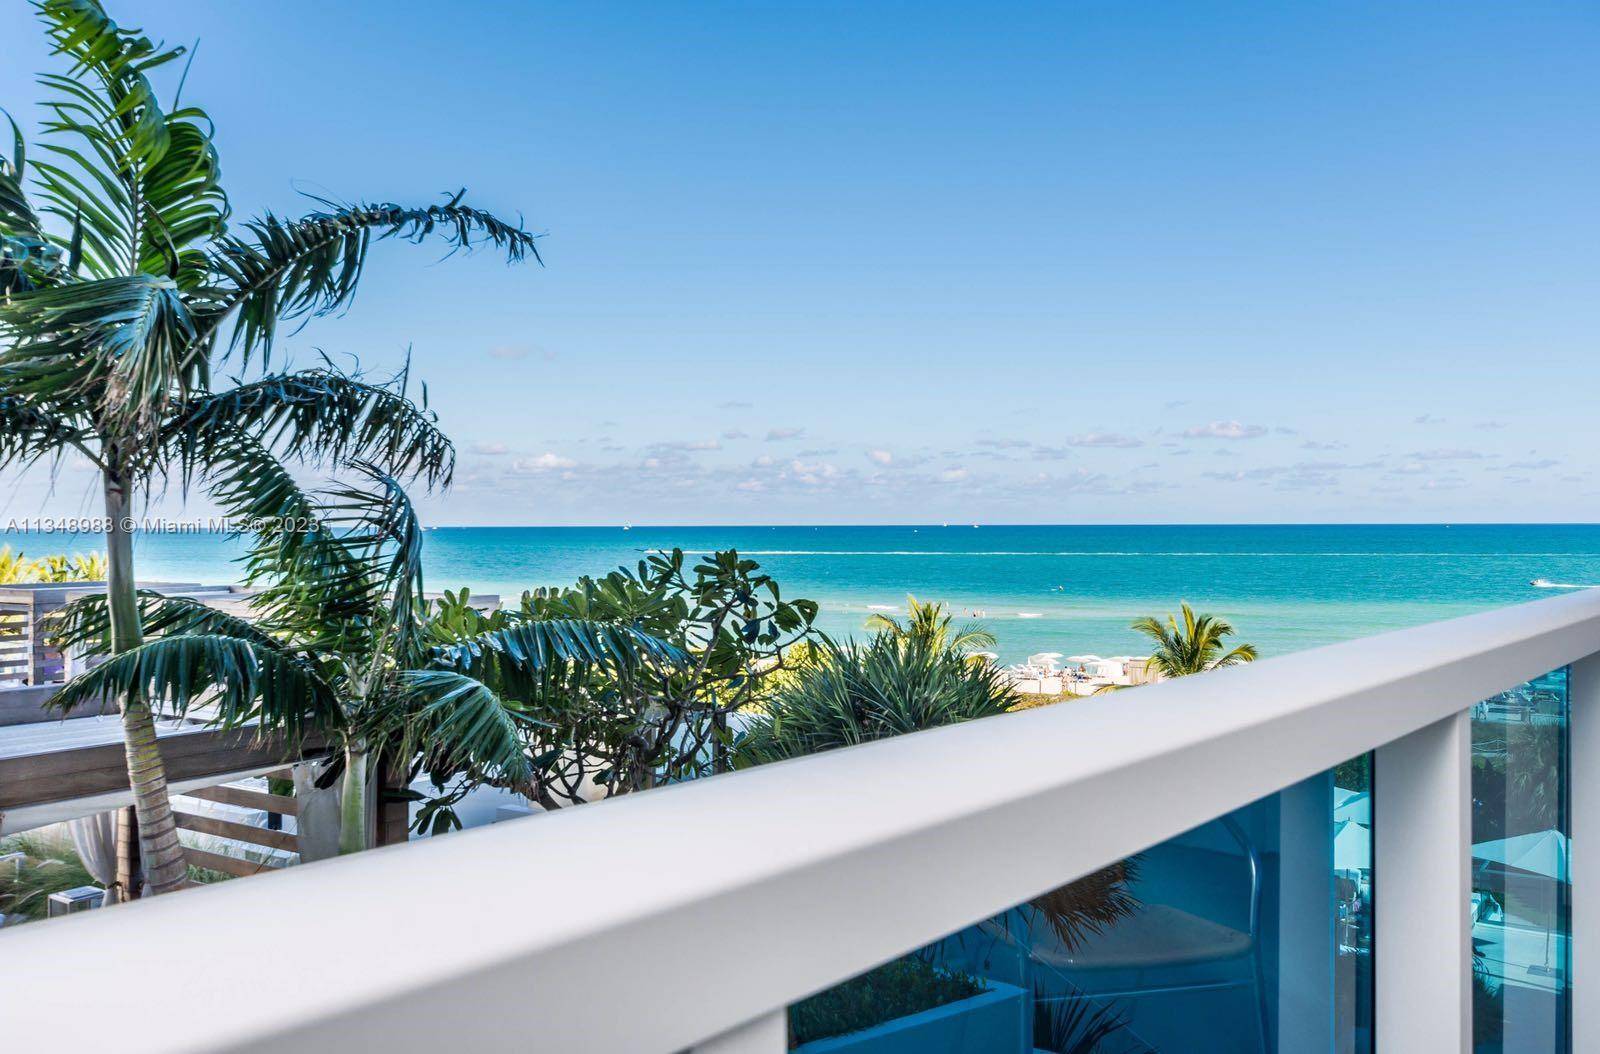 Modern oceanfront studio with a private balcony, offering stunning views of the 1 Hotel pool and ocean.